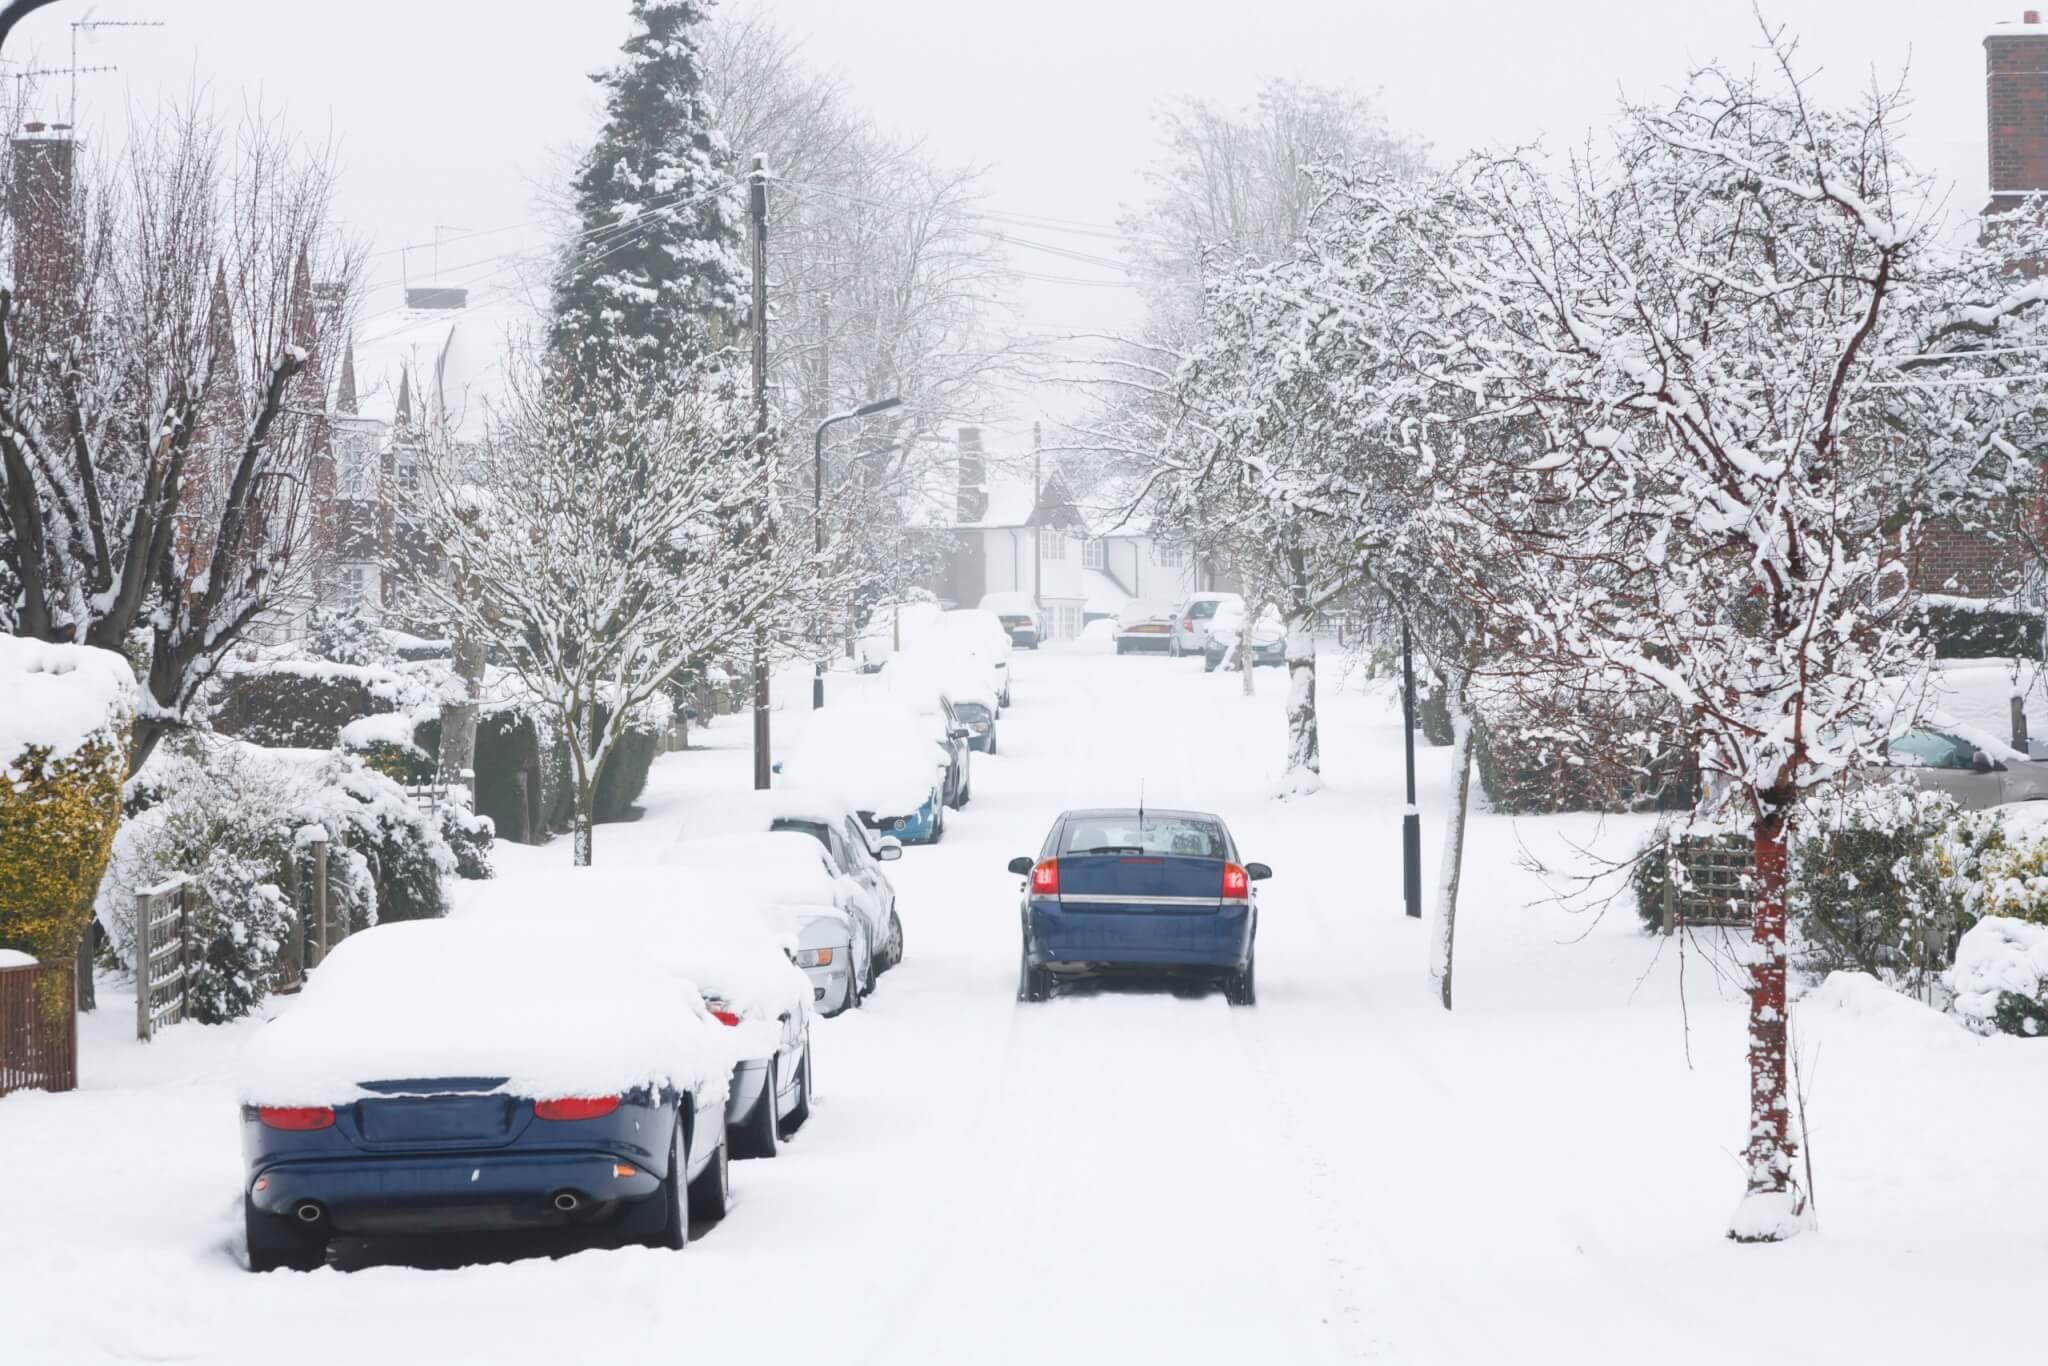 Make sure your short-term rental guests don't get trapped inside in the snow